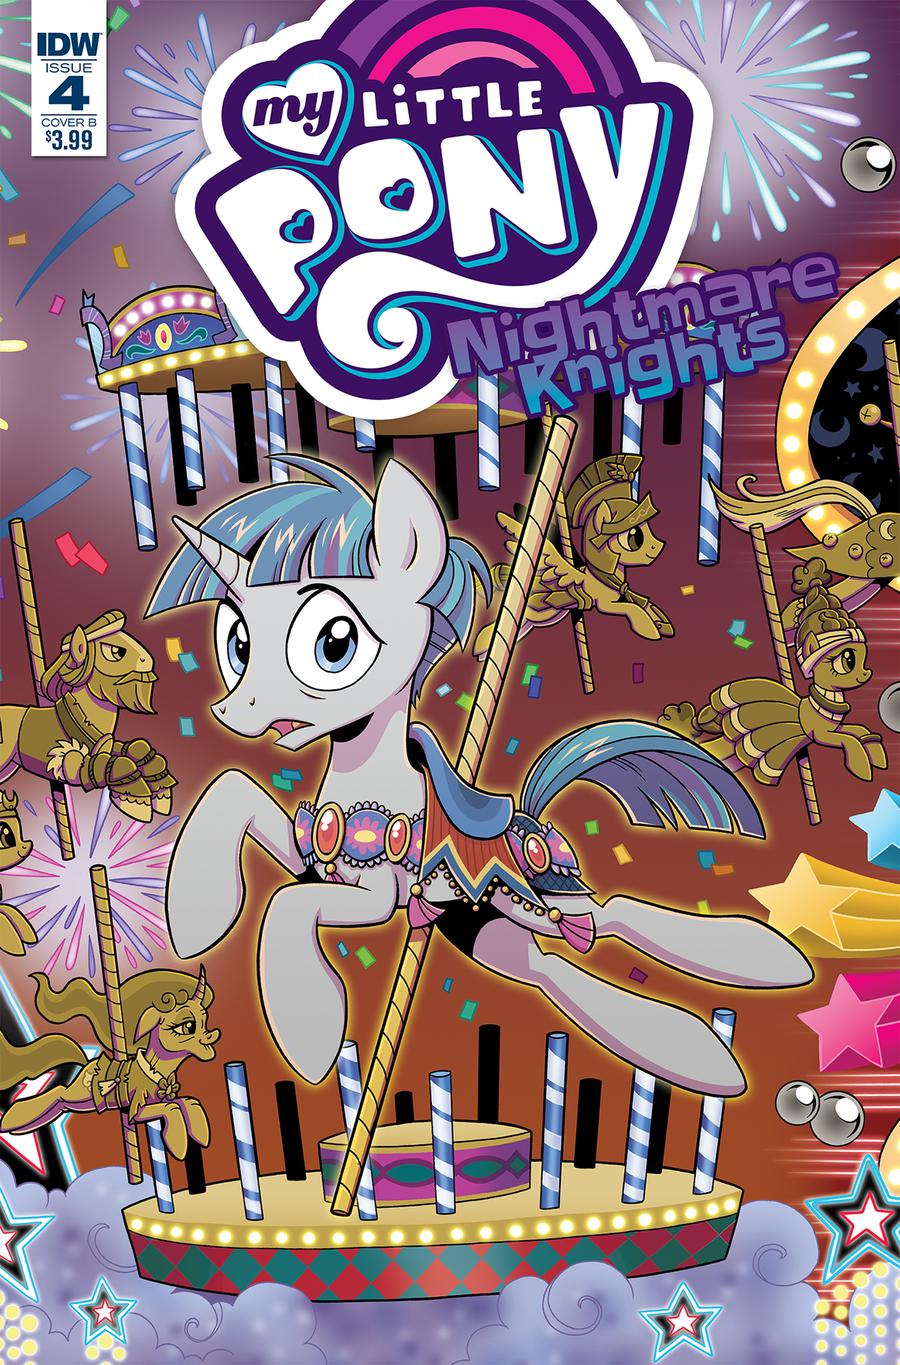 My Little Pony Nightmare Knights #4 Cover B Variant Brenda Hickey Cover